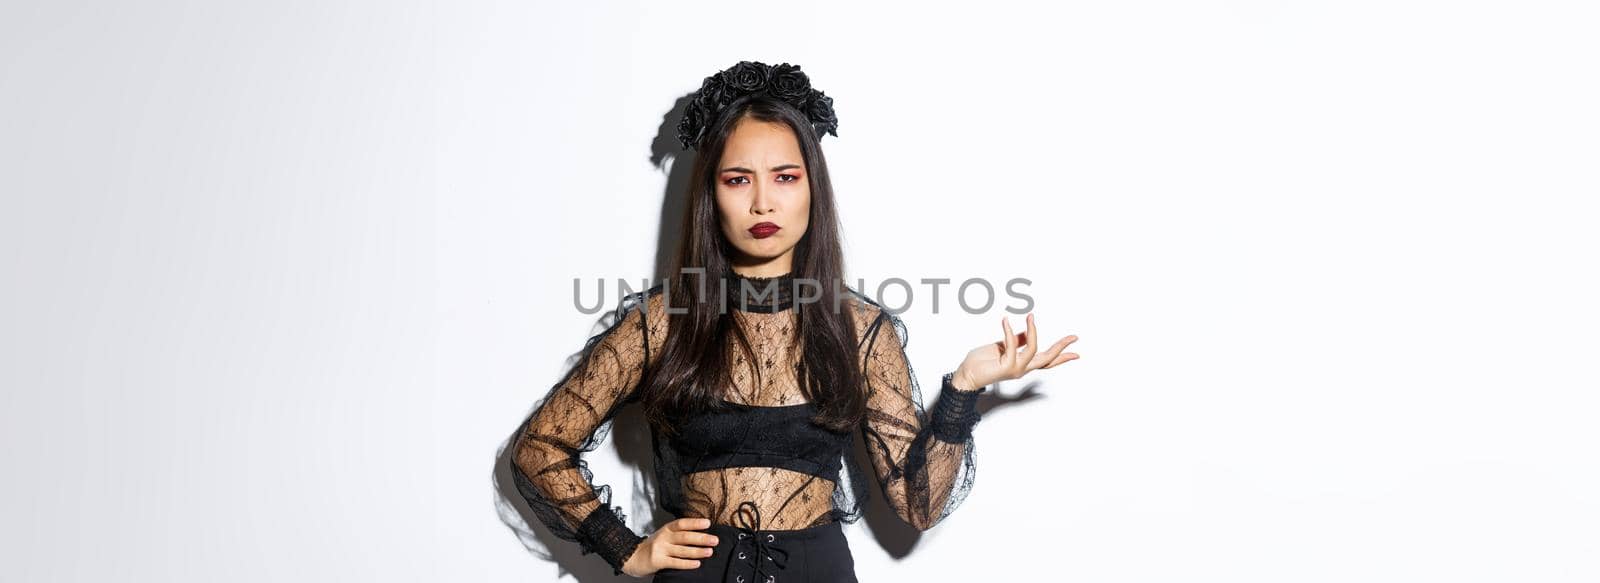 Confused and displeased asian woman cant understand something, raising hand and frowning frustrated, wearing halloween party dress, standing over white background.